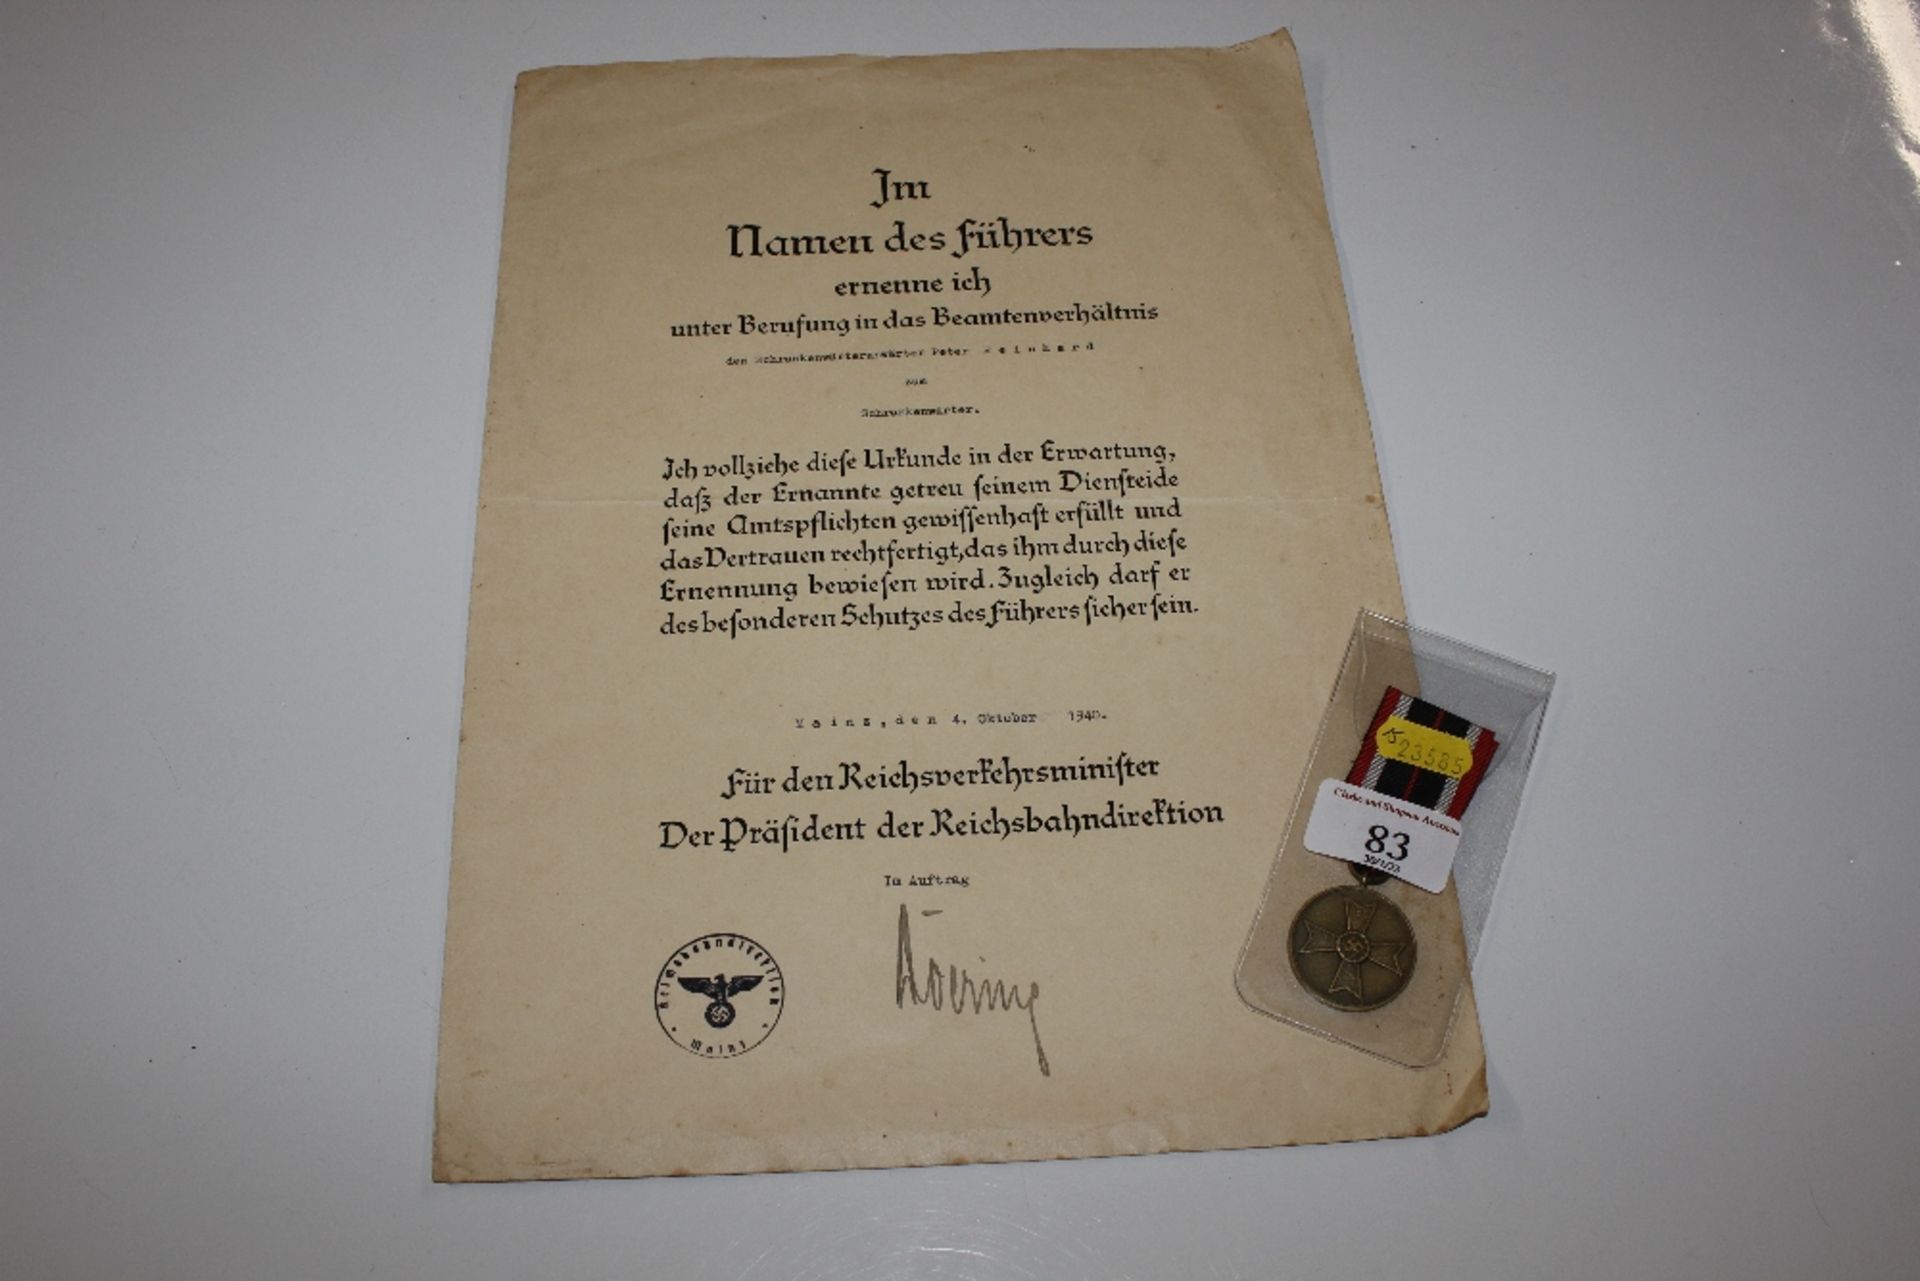 A German award document with medal to Dr. Peter Re